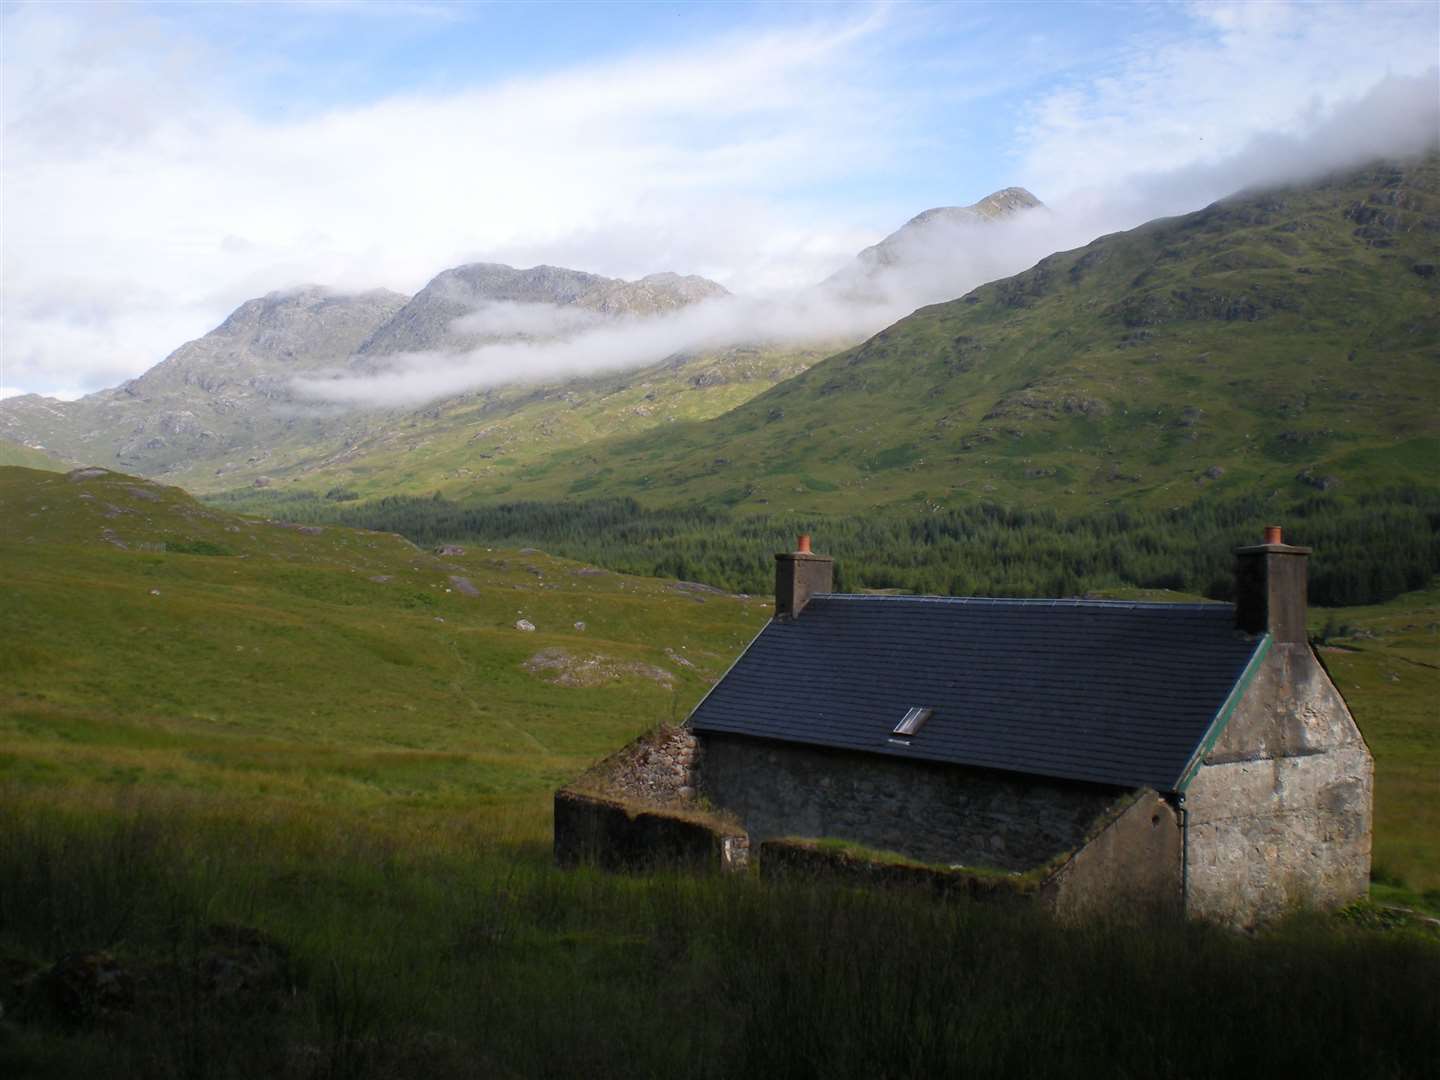 Garbh Chioch Mhor and Sgurr nan Coireachan with A Chuil bothy in foreground.